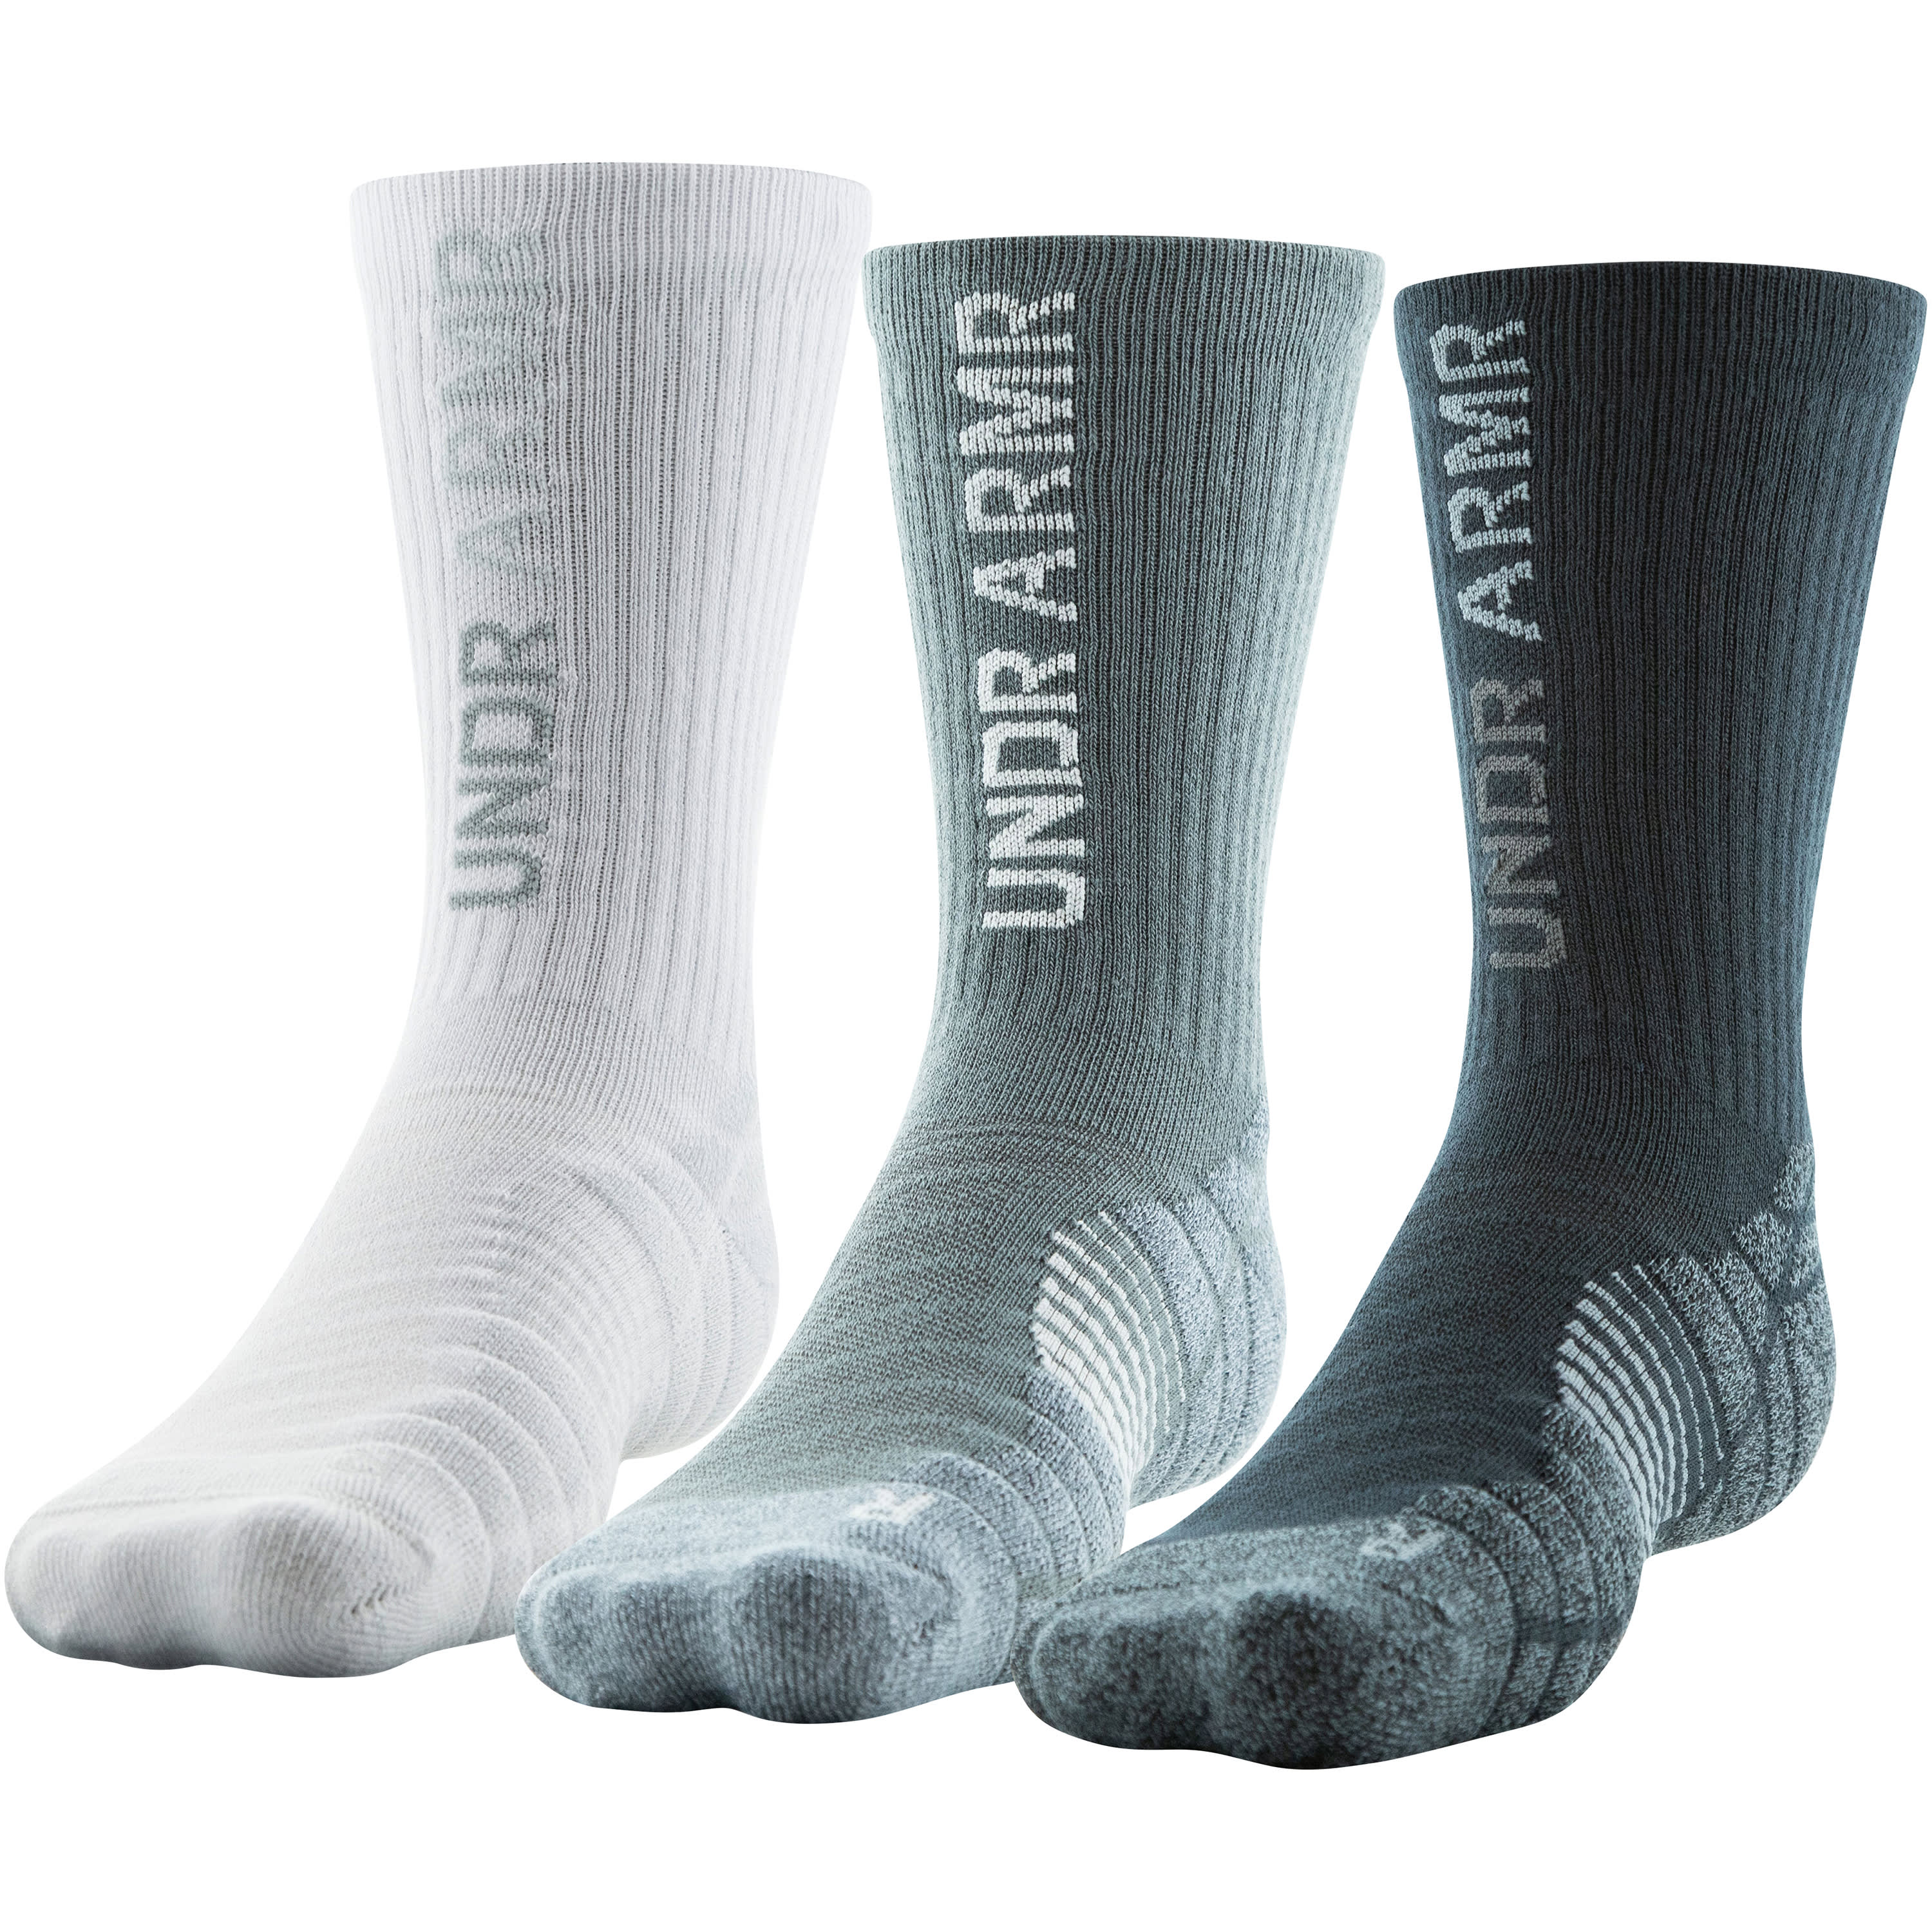 Under Armour® Men’s Elevated Novelty Crew Sock